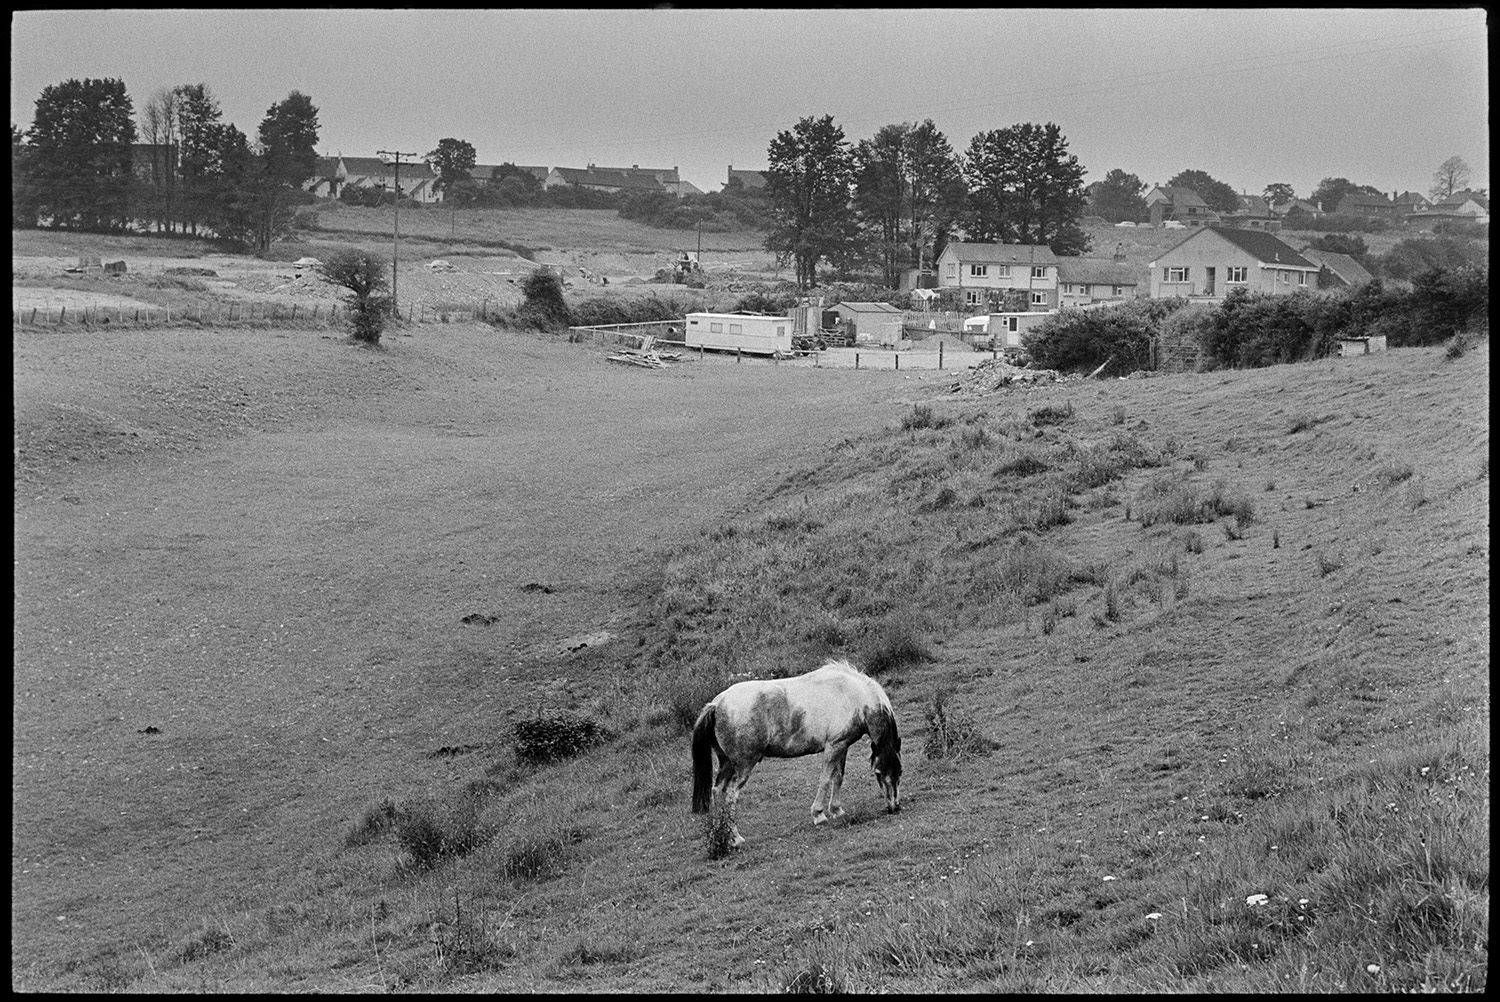 Horse in field in front of town before development. 
[A horse grazing in a field by houses in Torrington before the area was developed.]